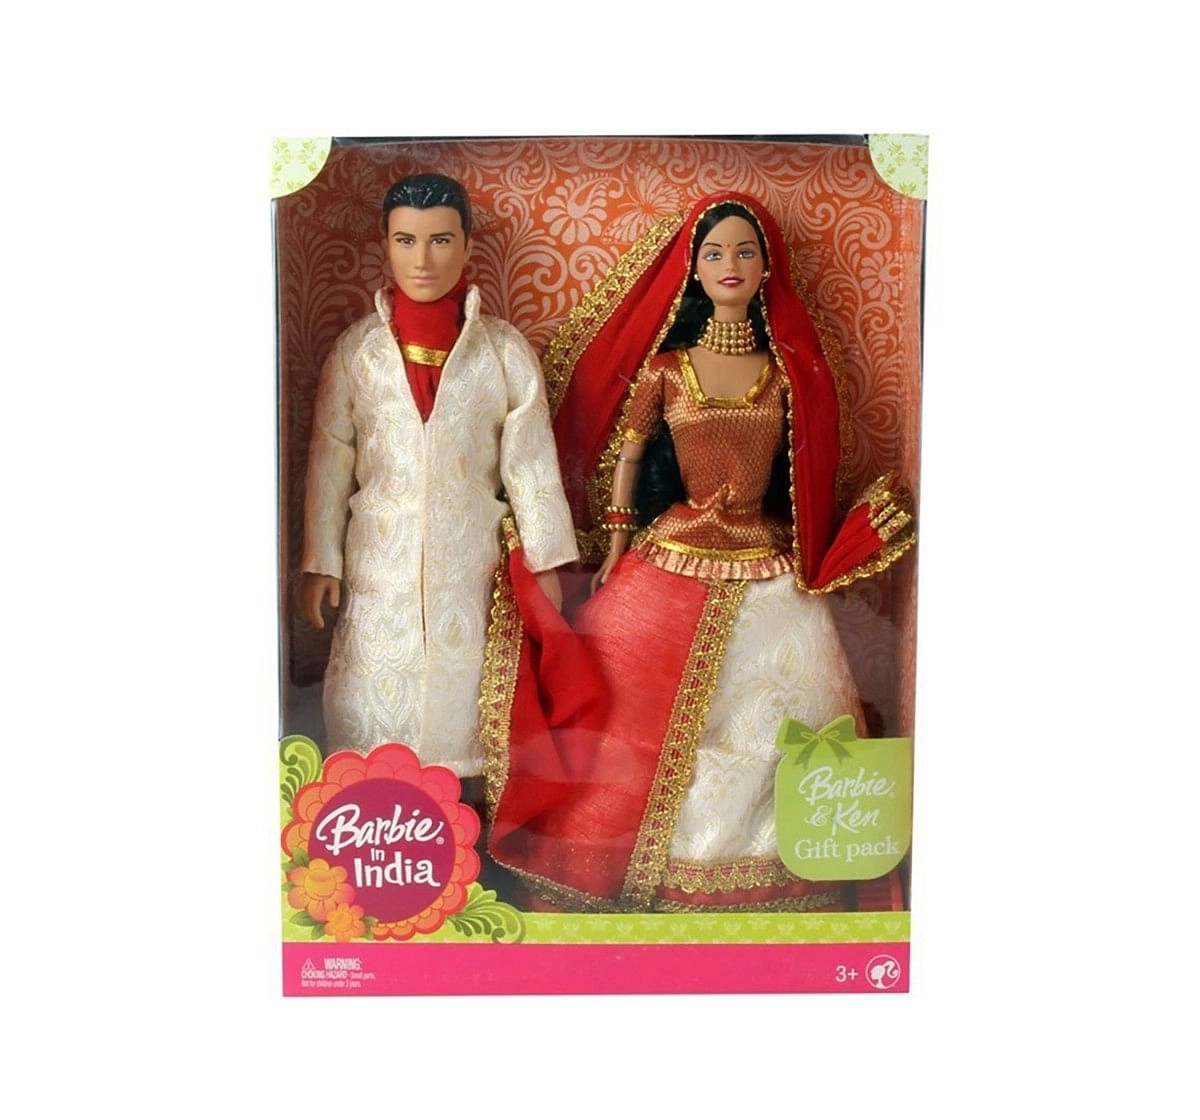 Barbie And Ken In India Dolls & Accessories for Kids age 3Y+, Assorted